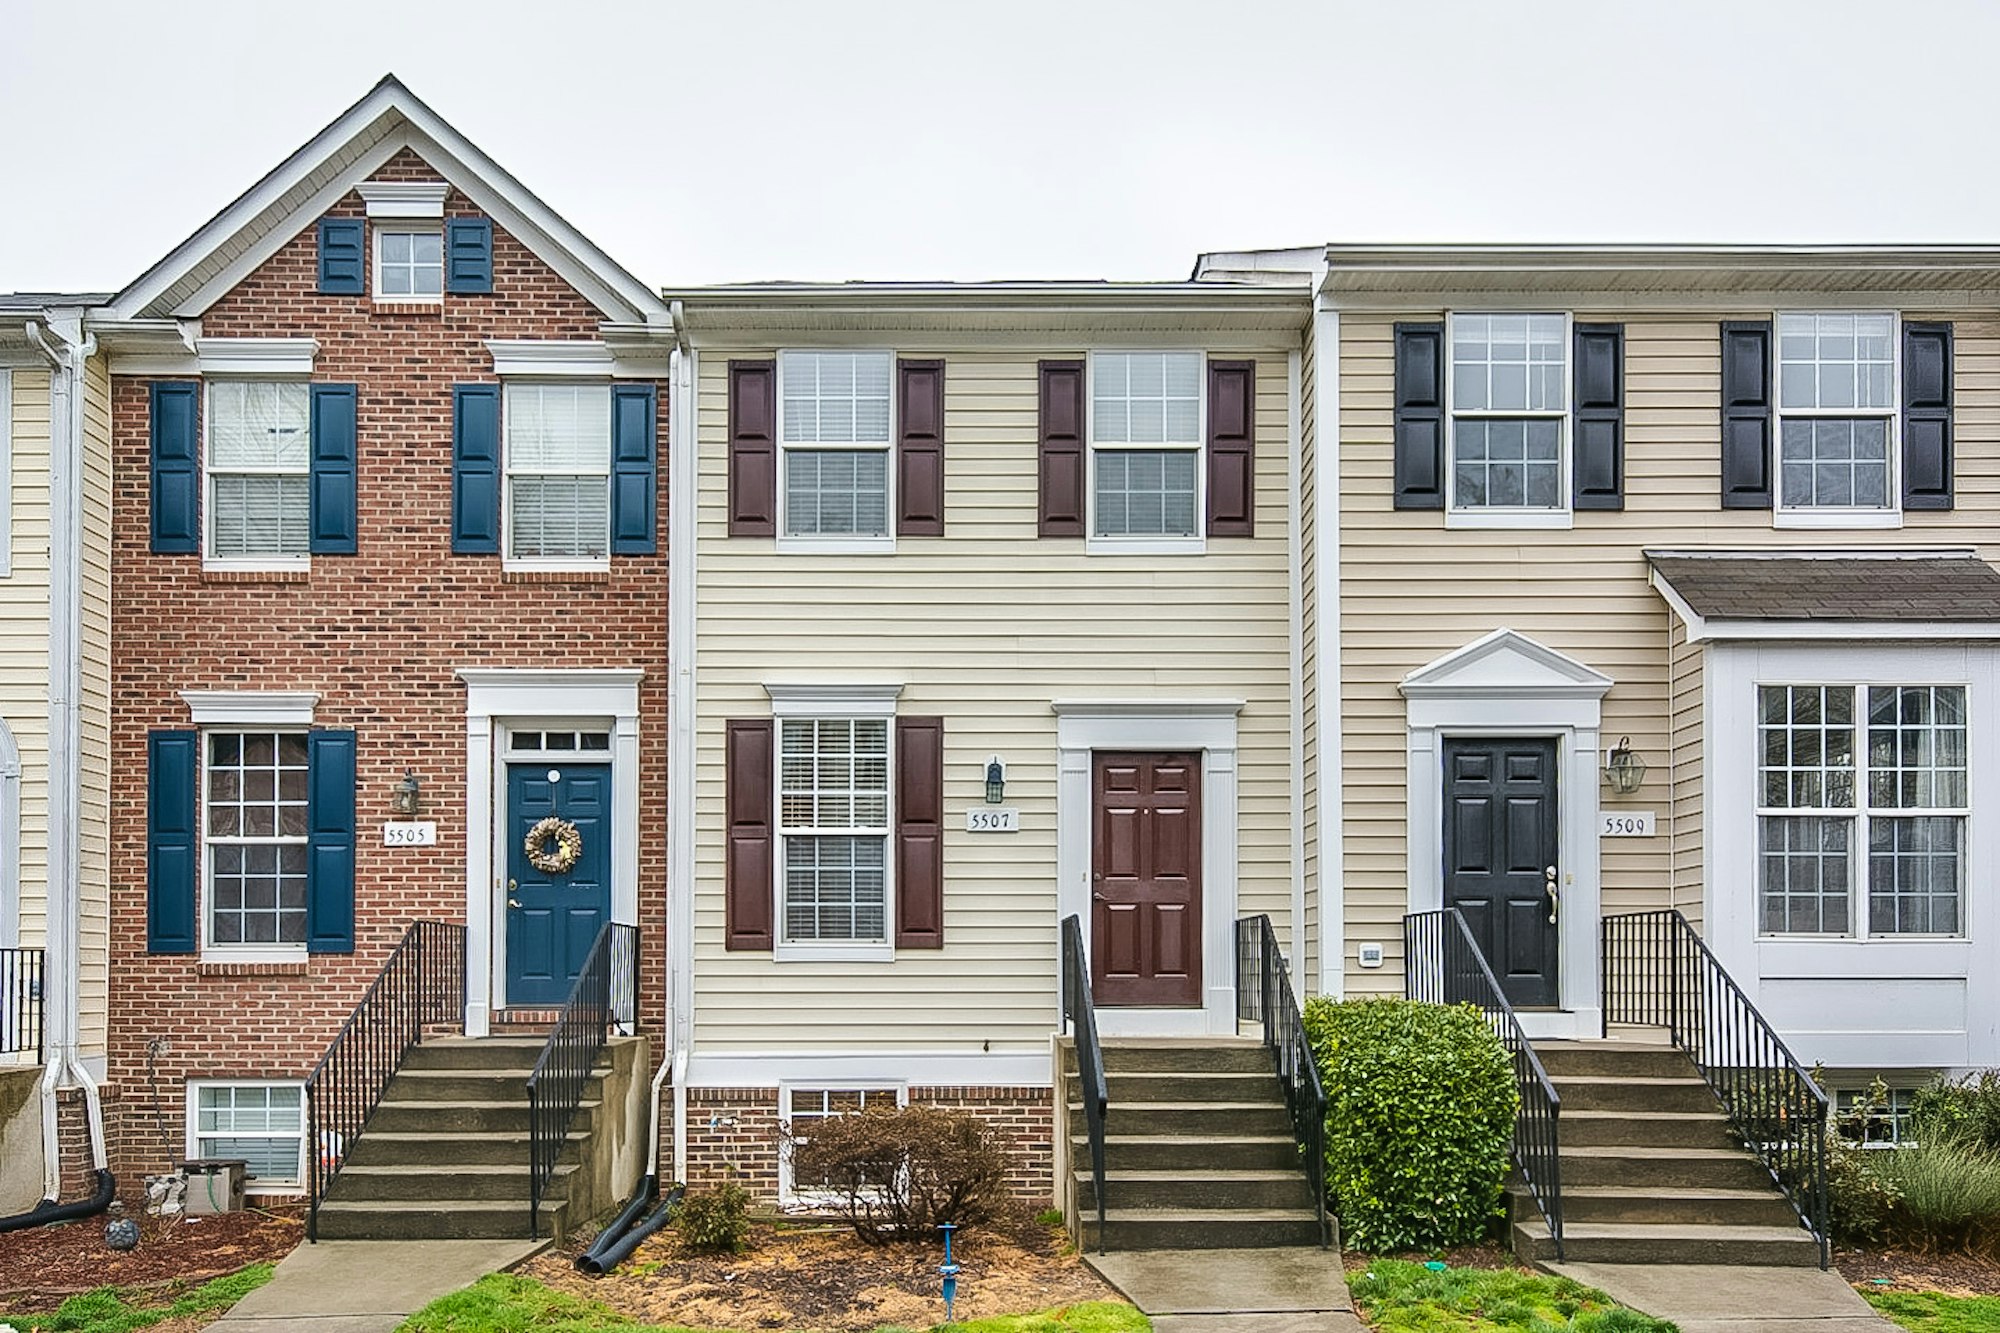 Photo 1 of 15 - 5507 Vista View Ct, Raleigh, NC 27612